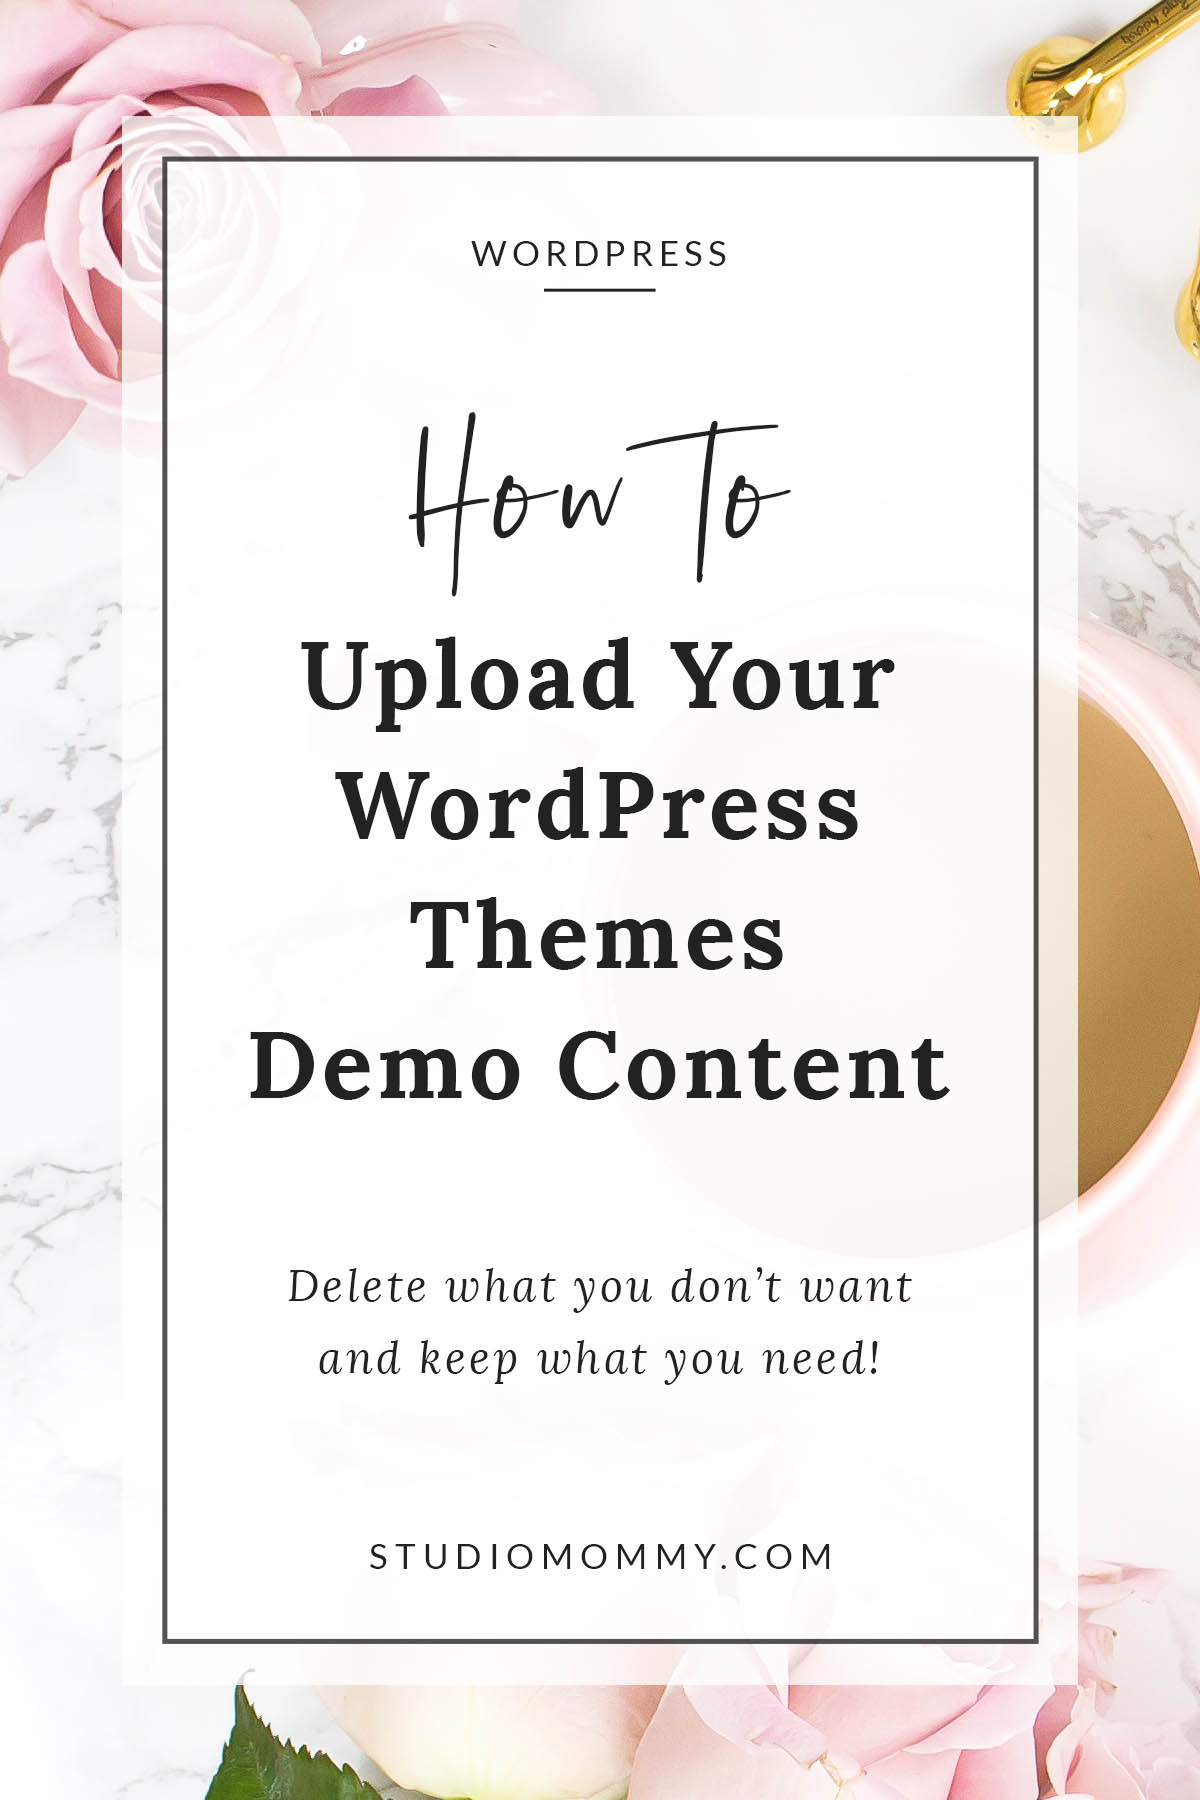 If you are starting a brand new site for the first time, your site will look nothing like the demo site. Uploading your WordPress theme's demo content is a great way to get started. This will give you a starting point. You will be able to delete what you don't want and keep what you need.